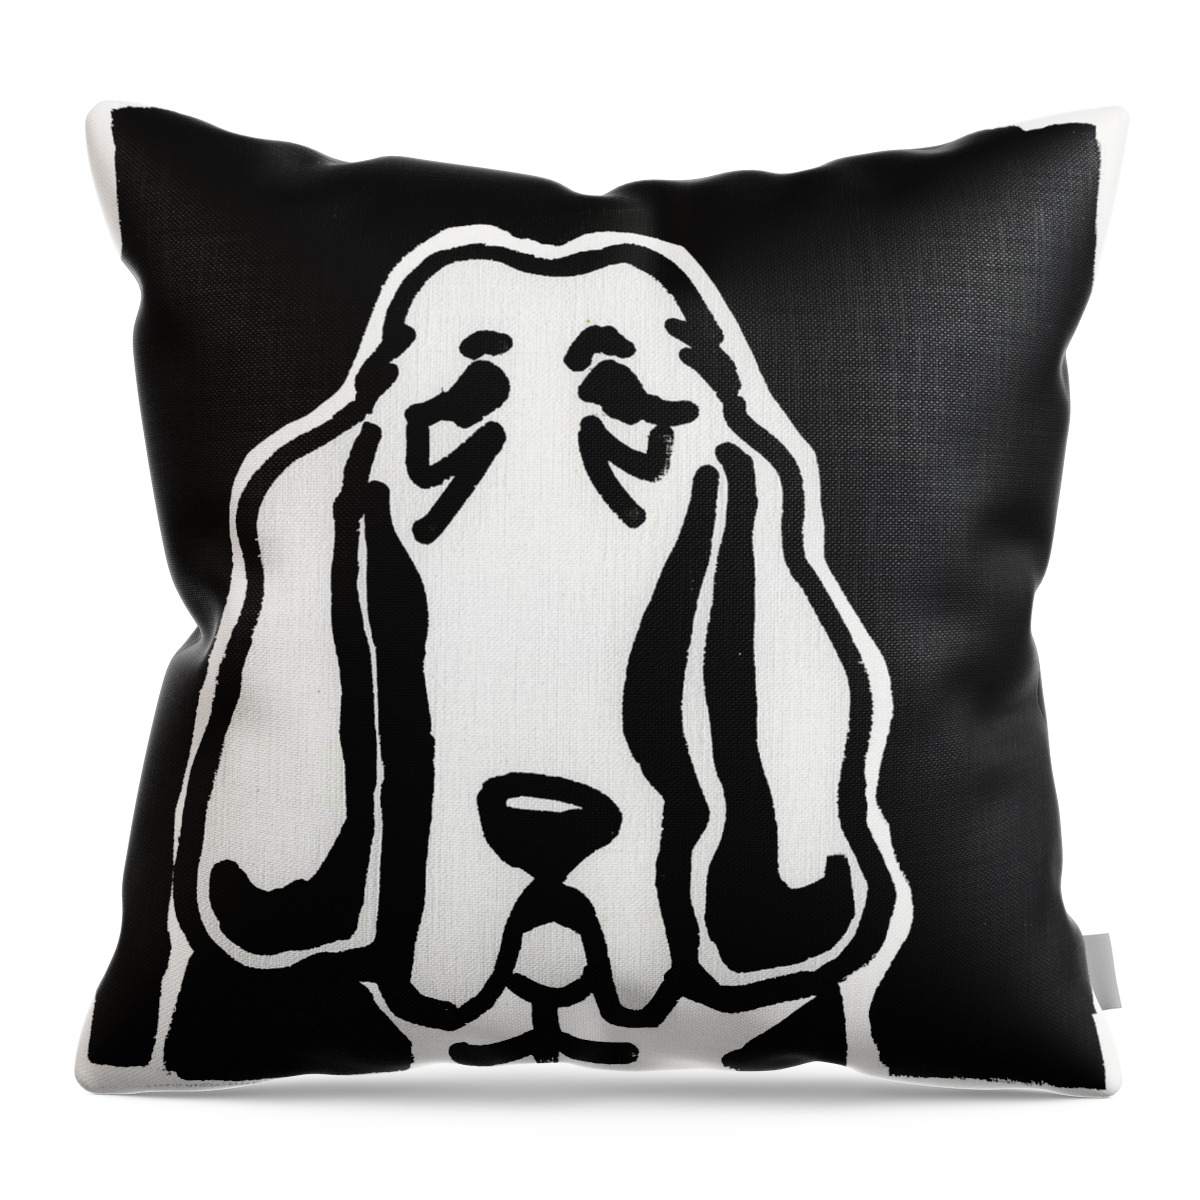 Basset Hound Throw Pillow featuring the drawing Basset Hound Ink Sketch by Leanne WILKES